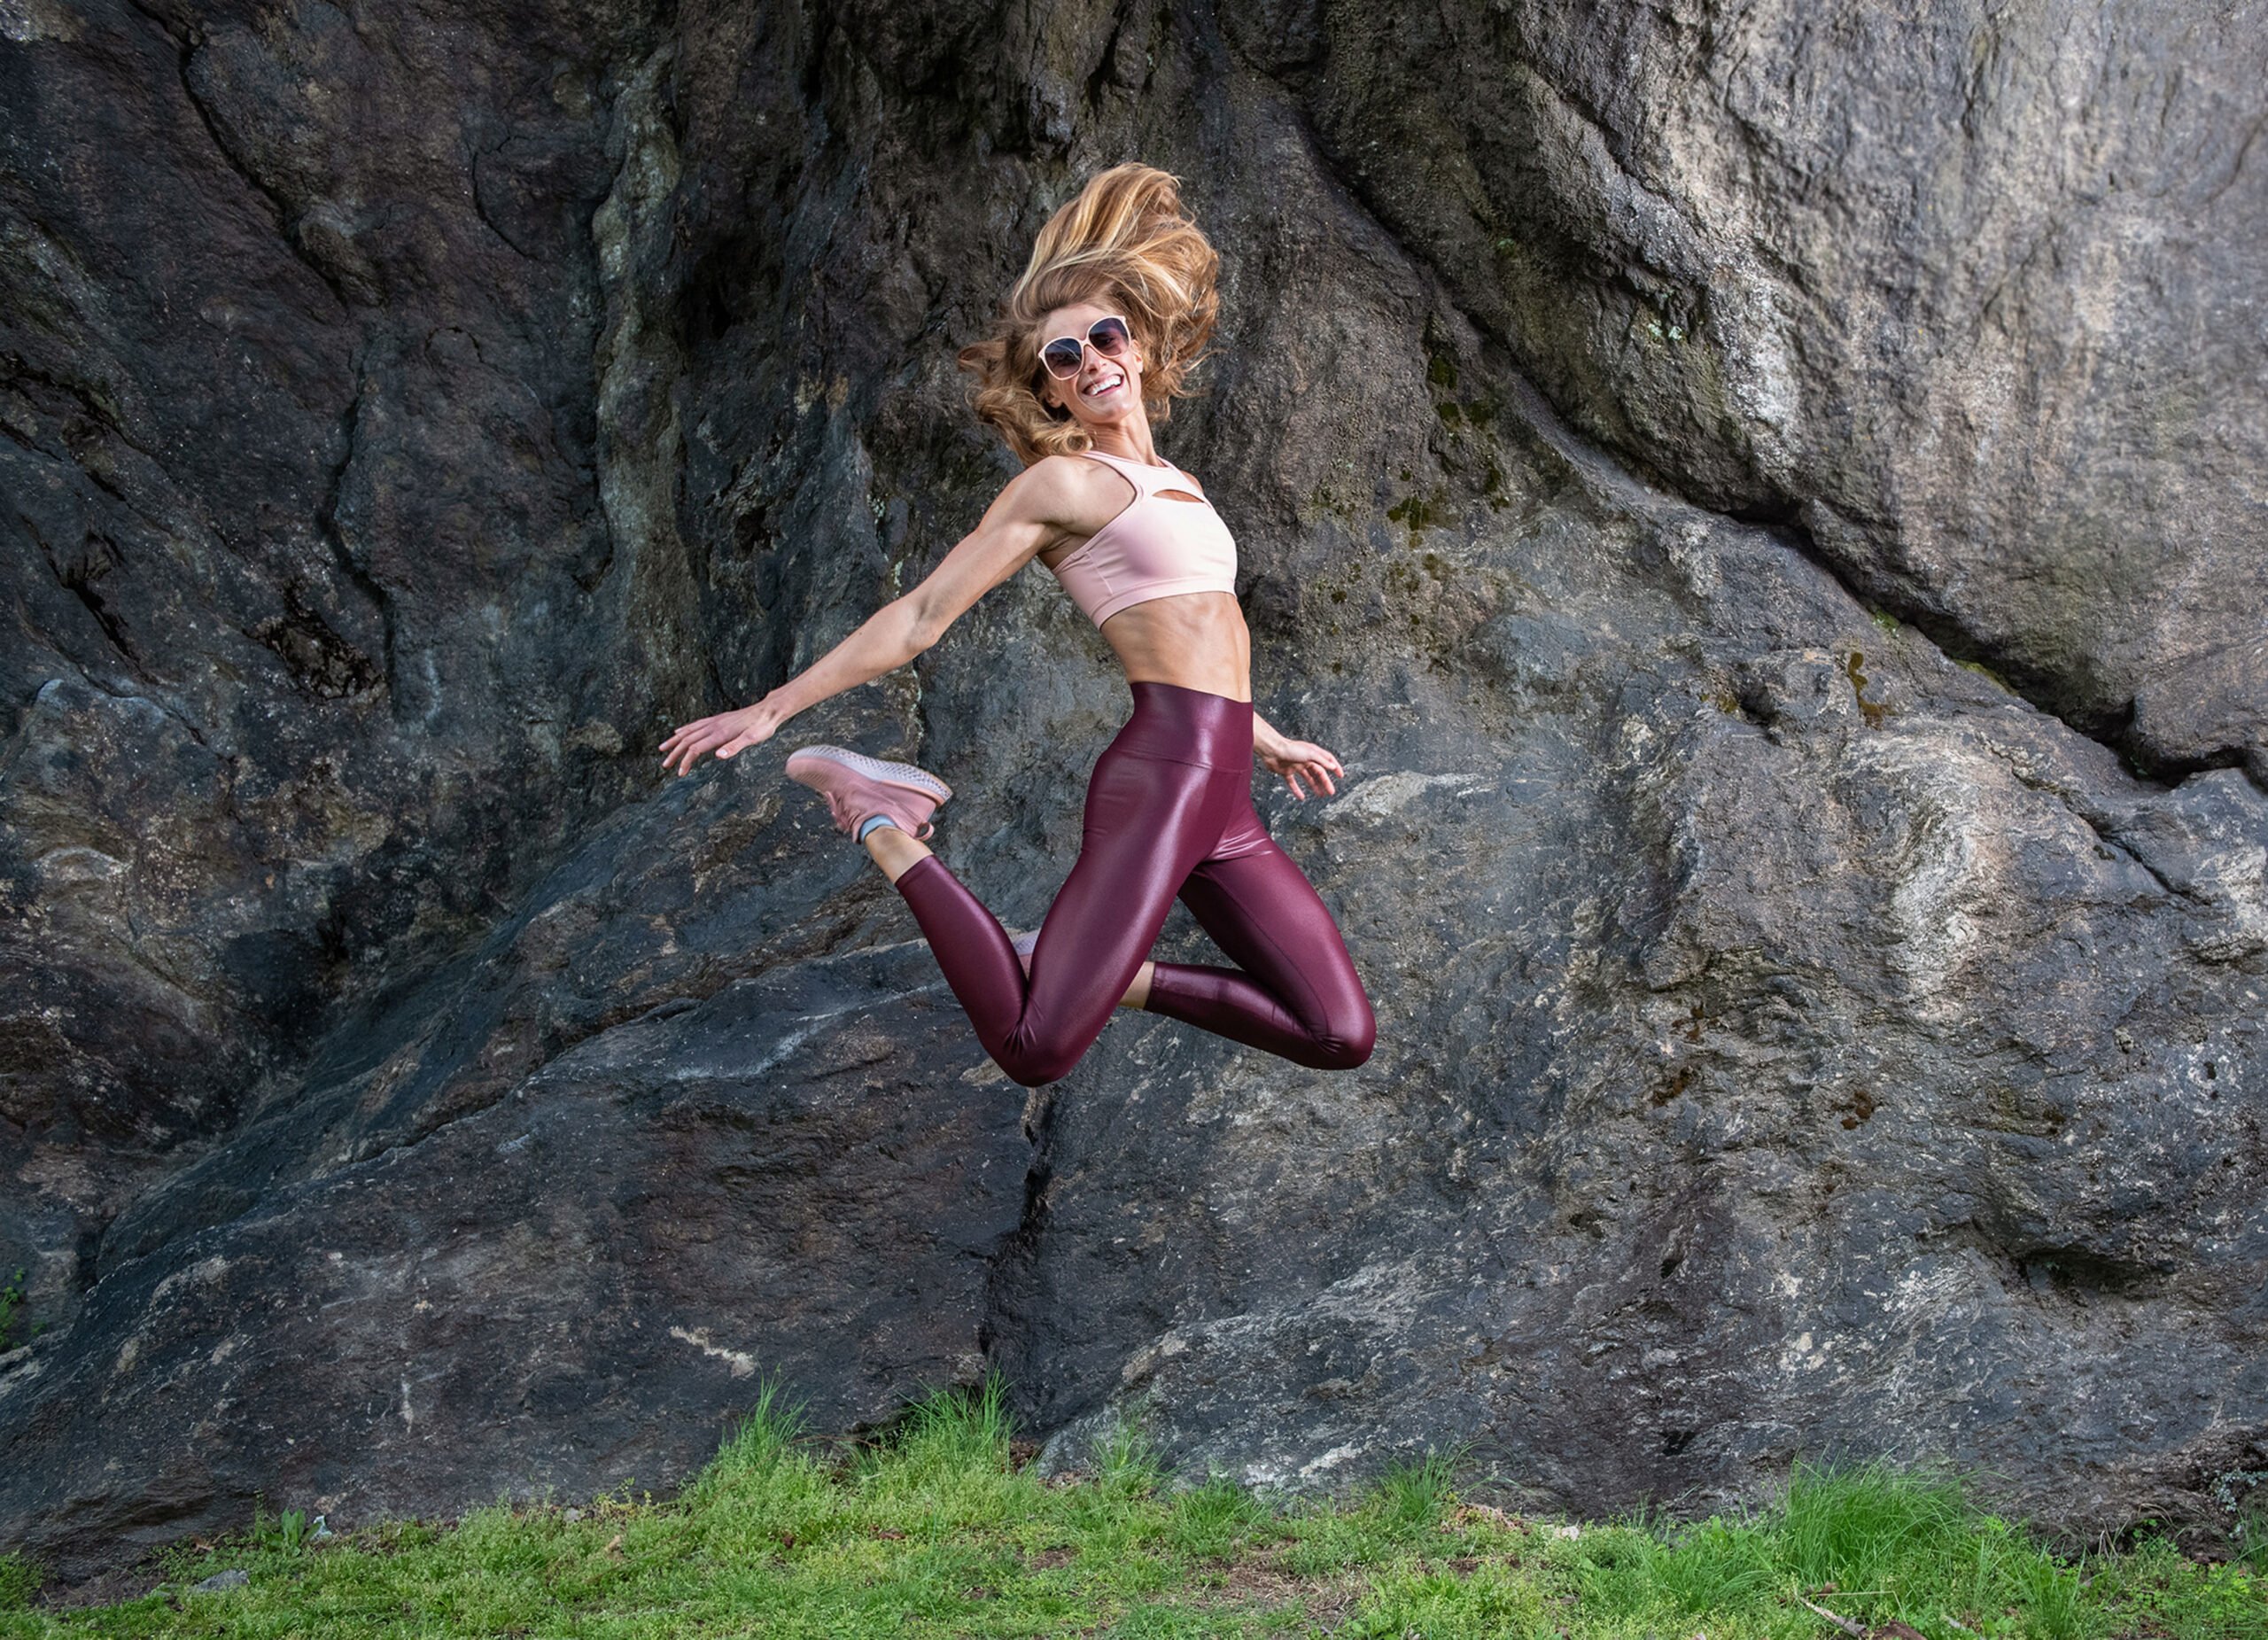 Julia Lehman catches Cat in mid-leap in front of the rocks while wearing sunglasses